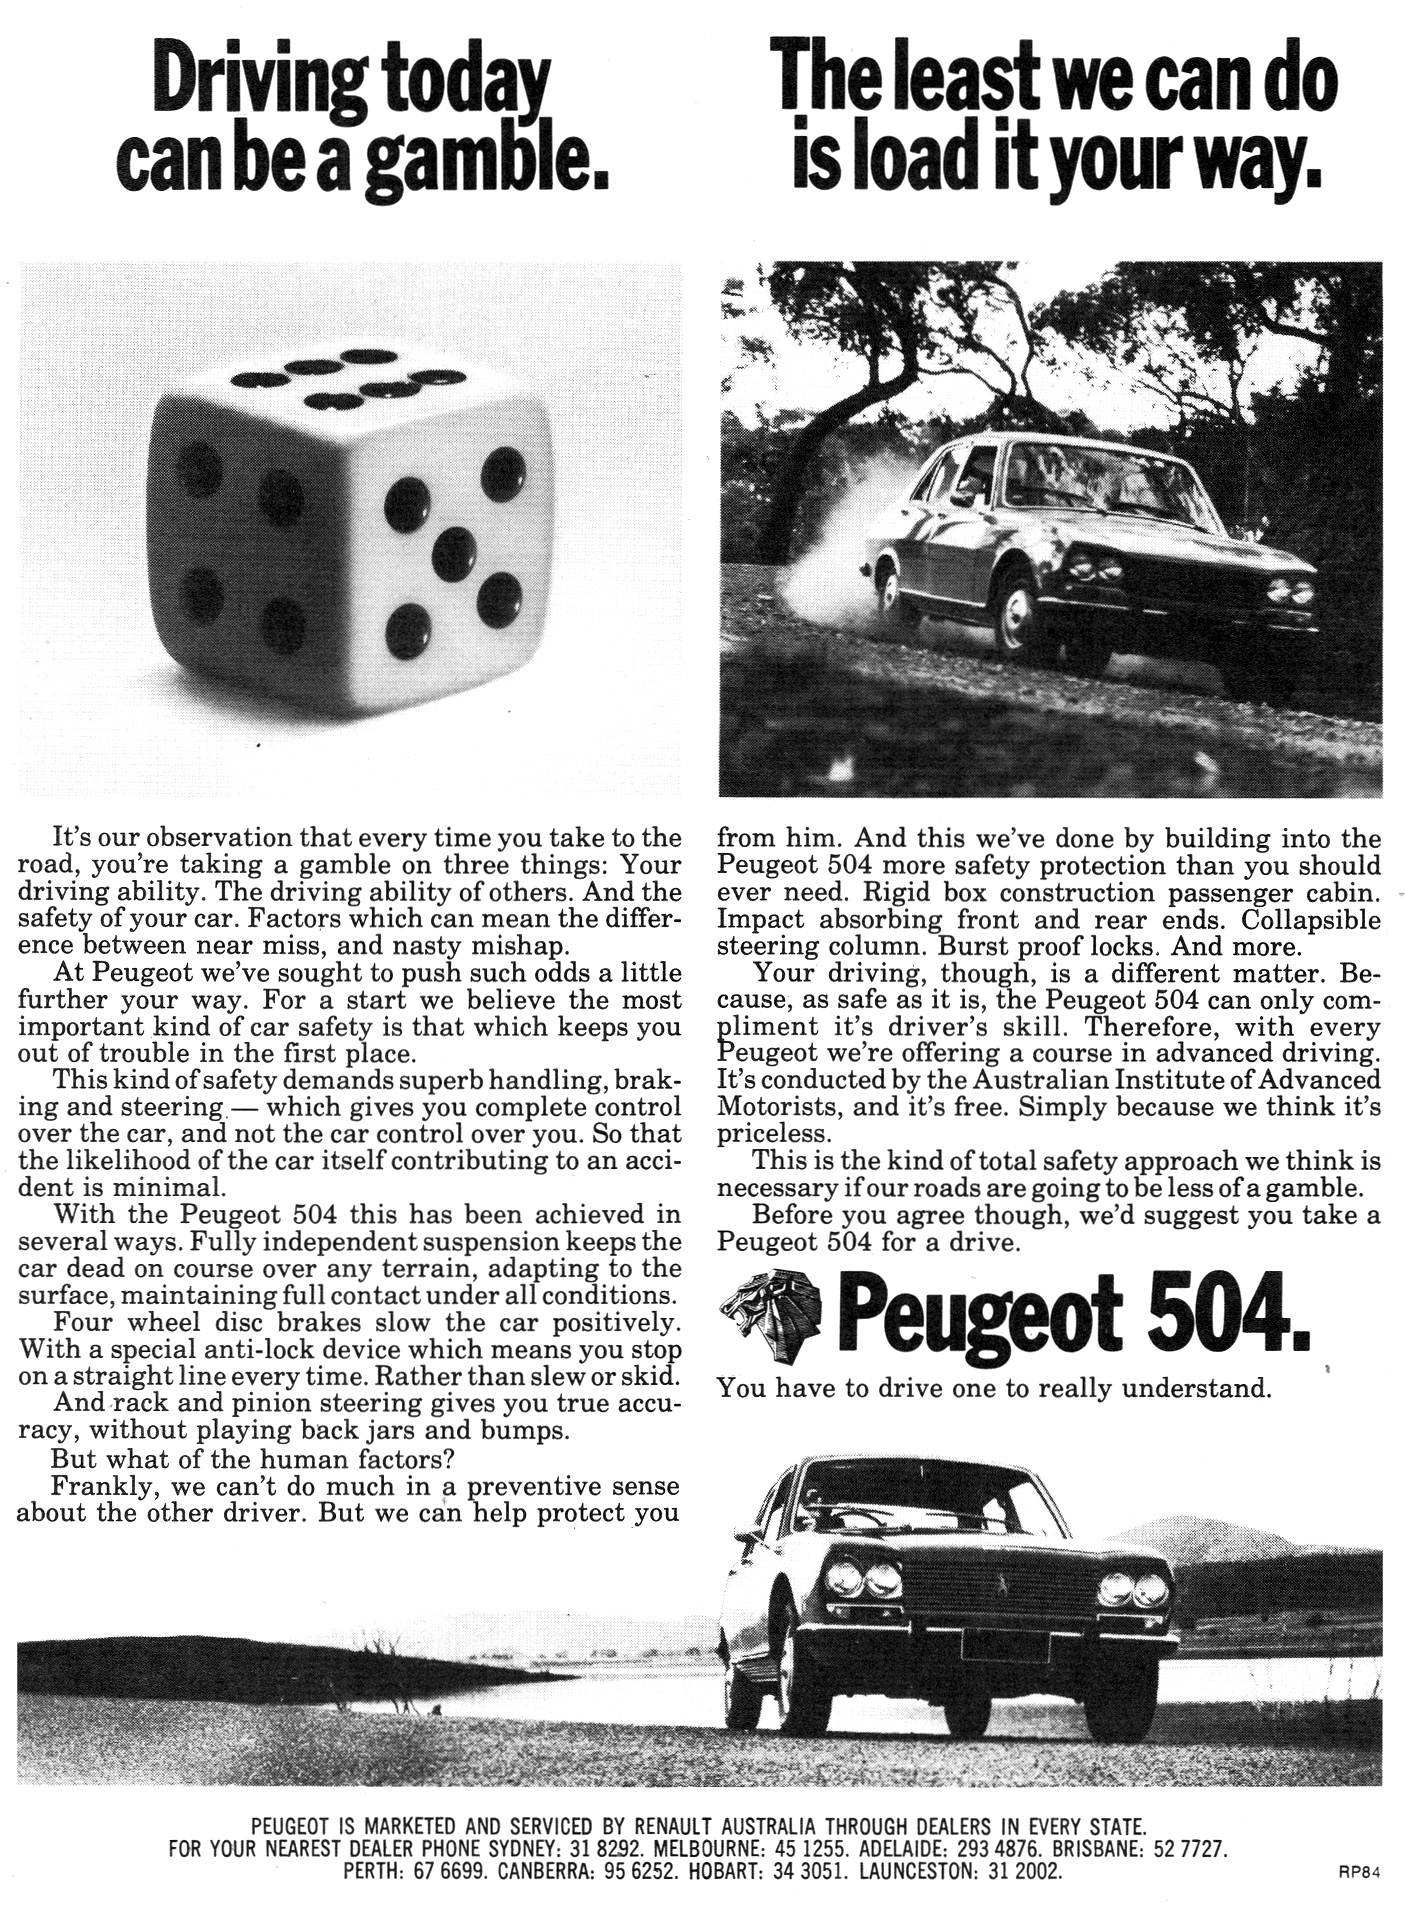 1973 Peugeot 504 Driving Today Can Be A Gamble